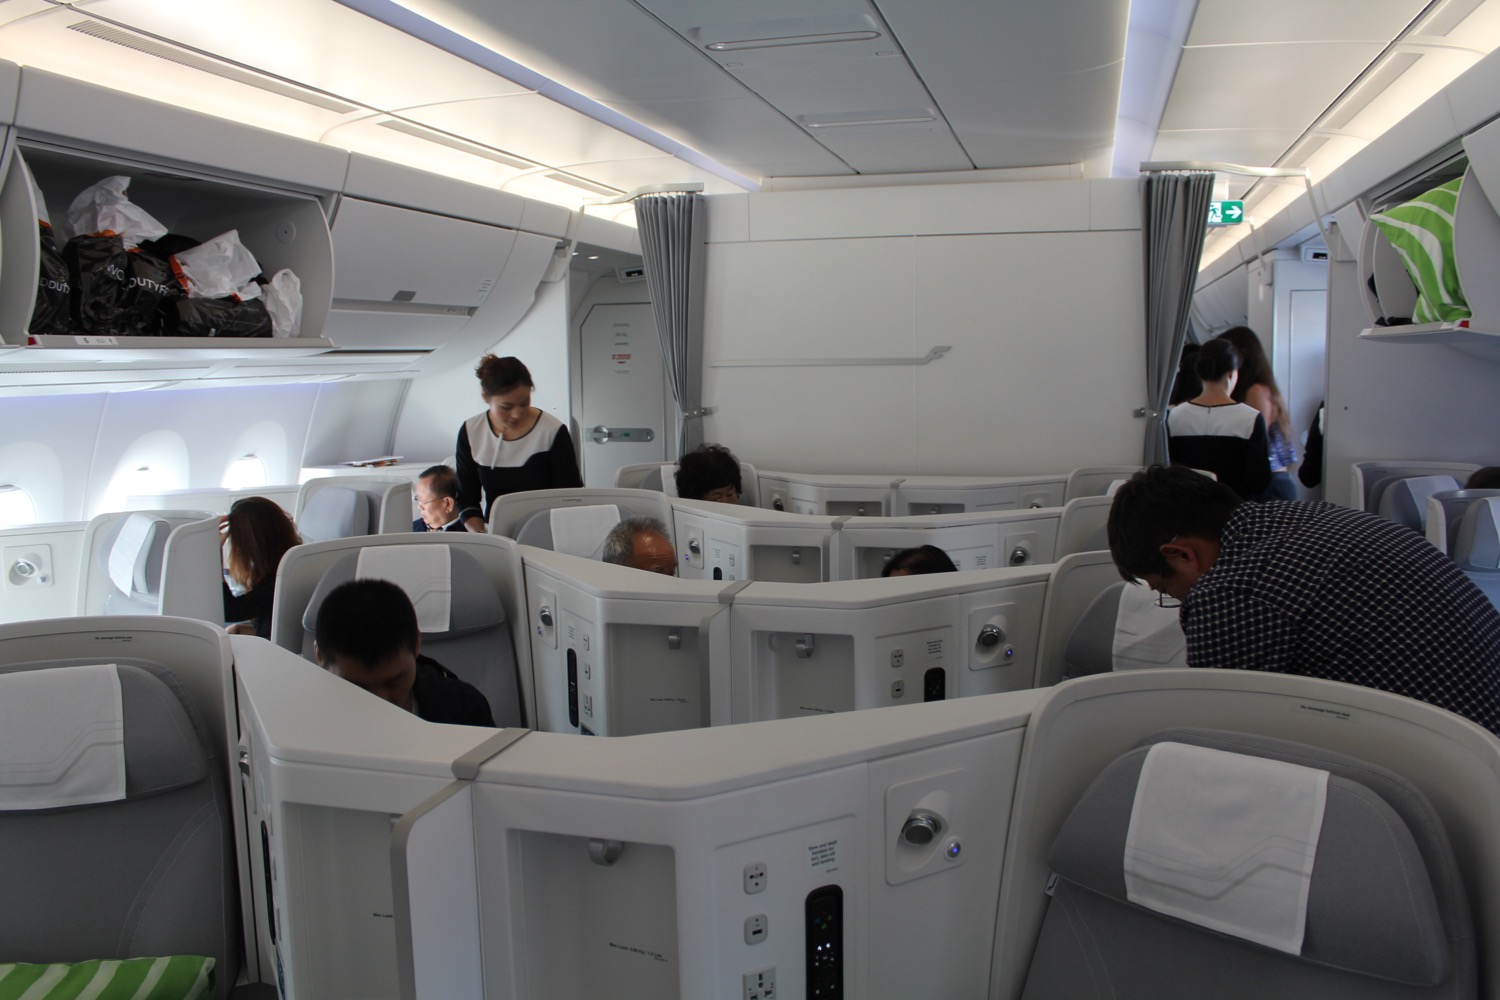 a group of people in an airplane